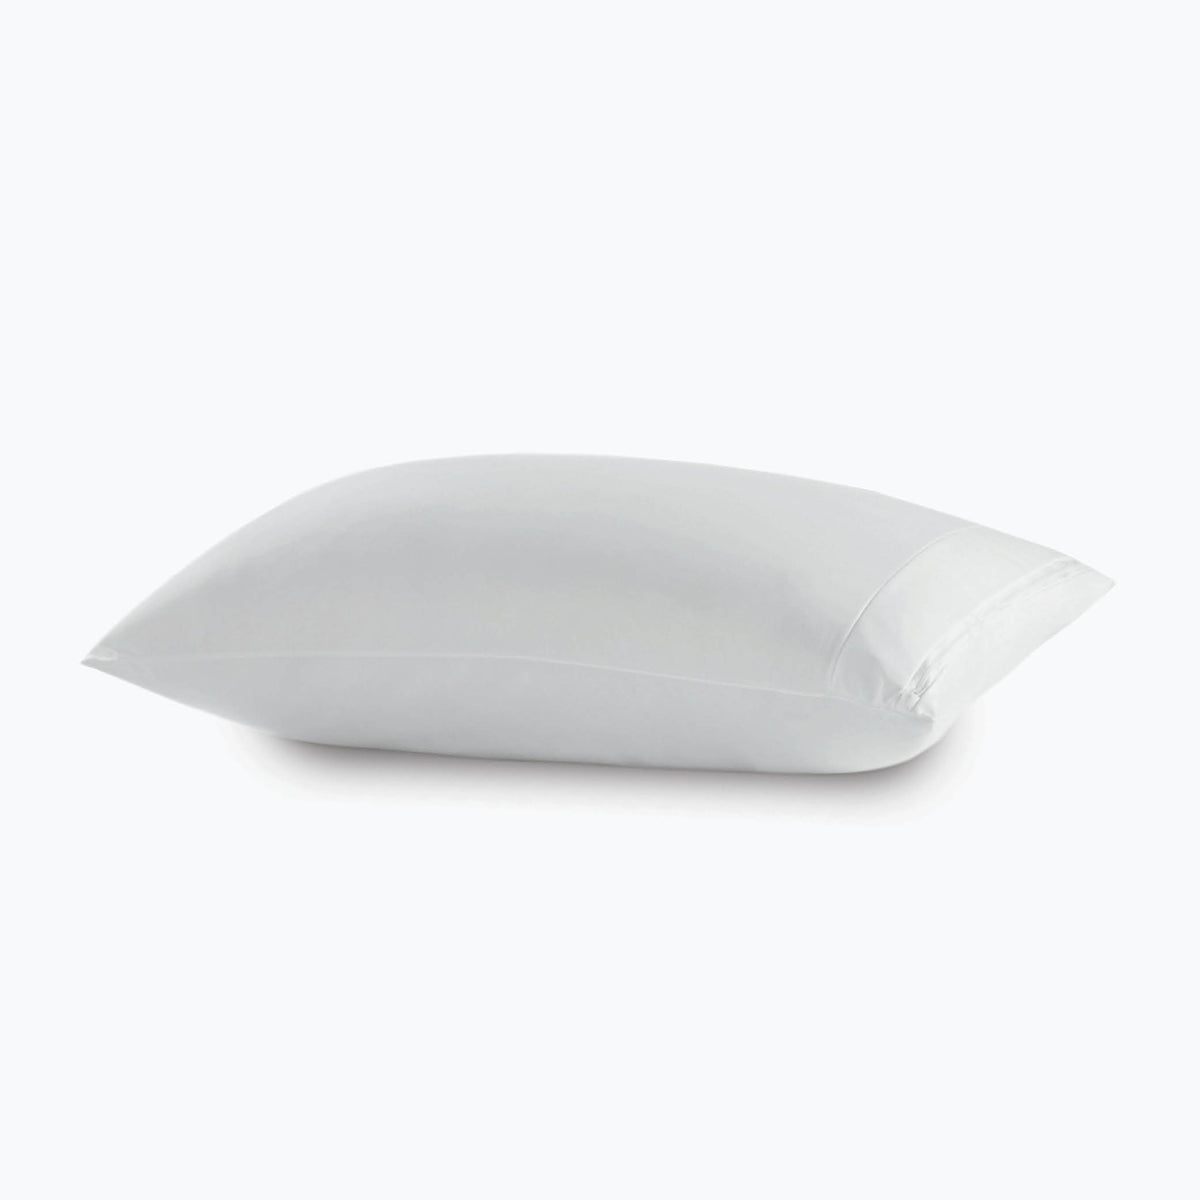 Image of a Pillow Protector on a pillow on a white background 